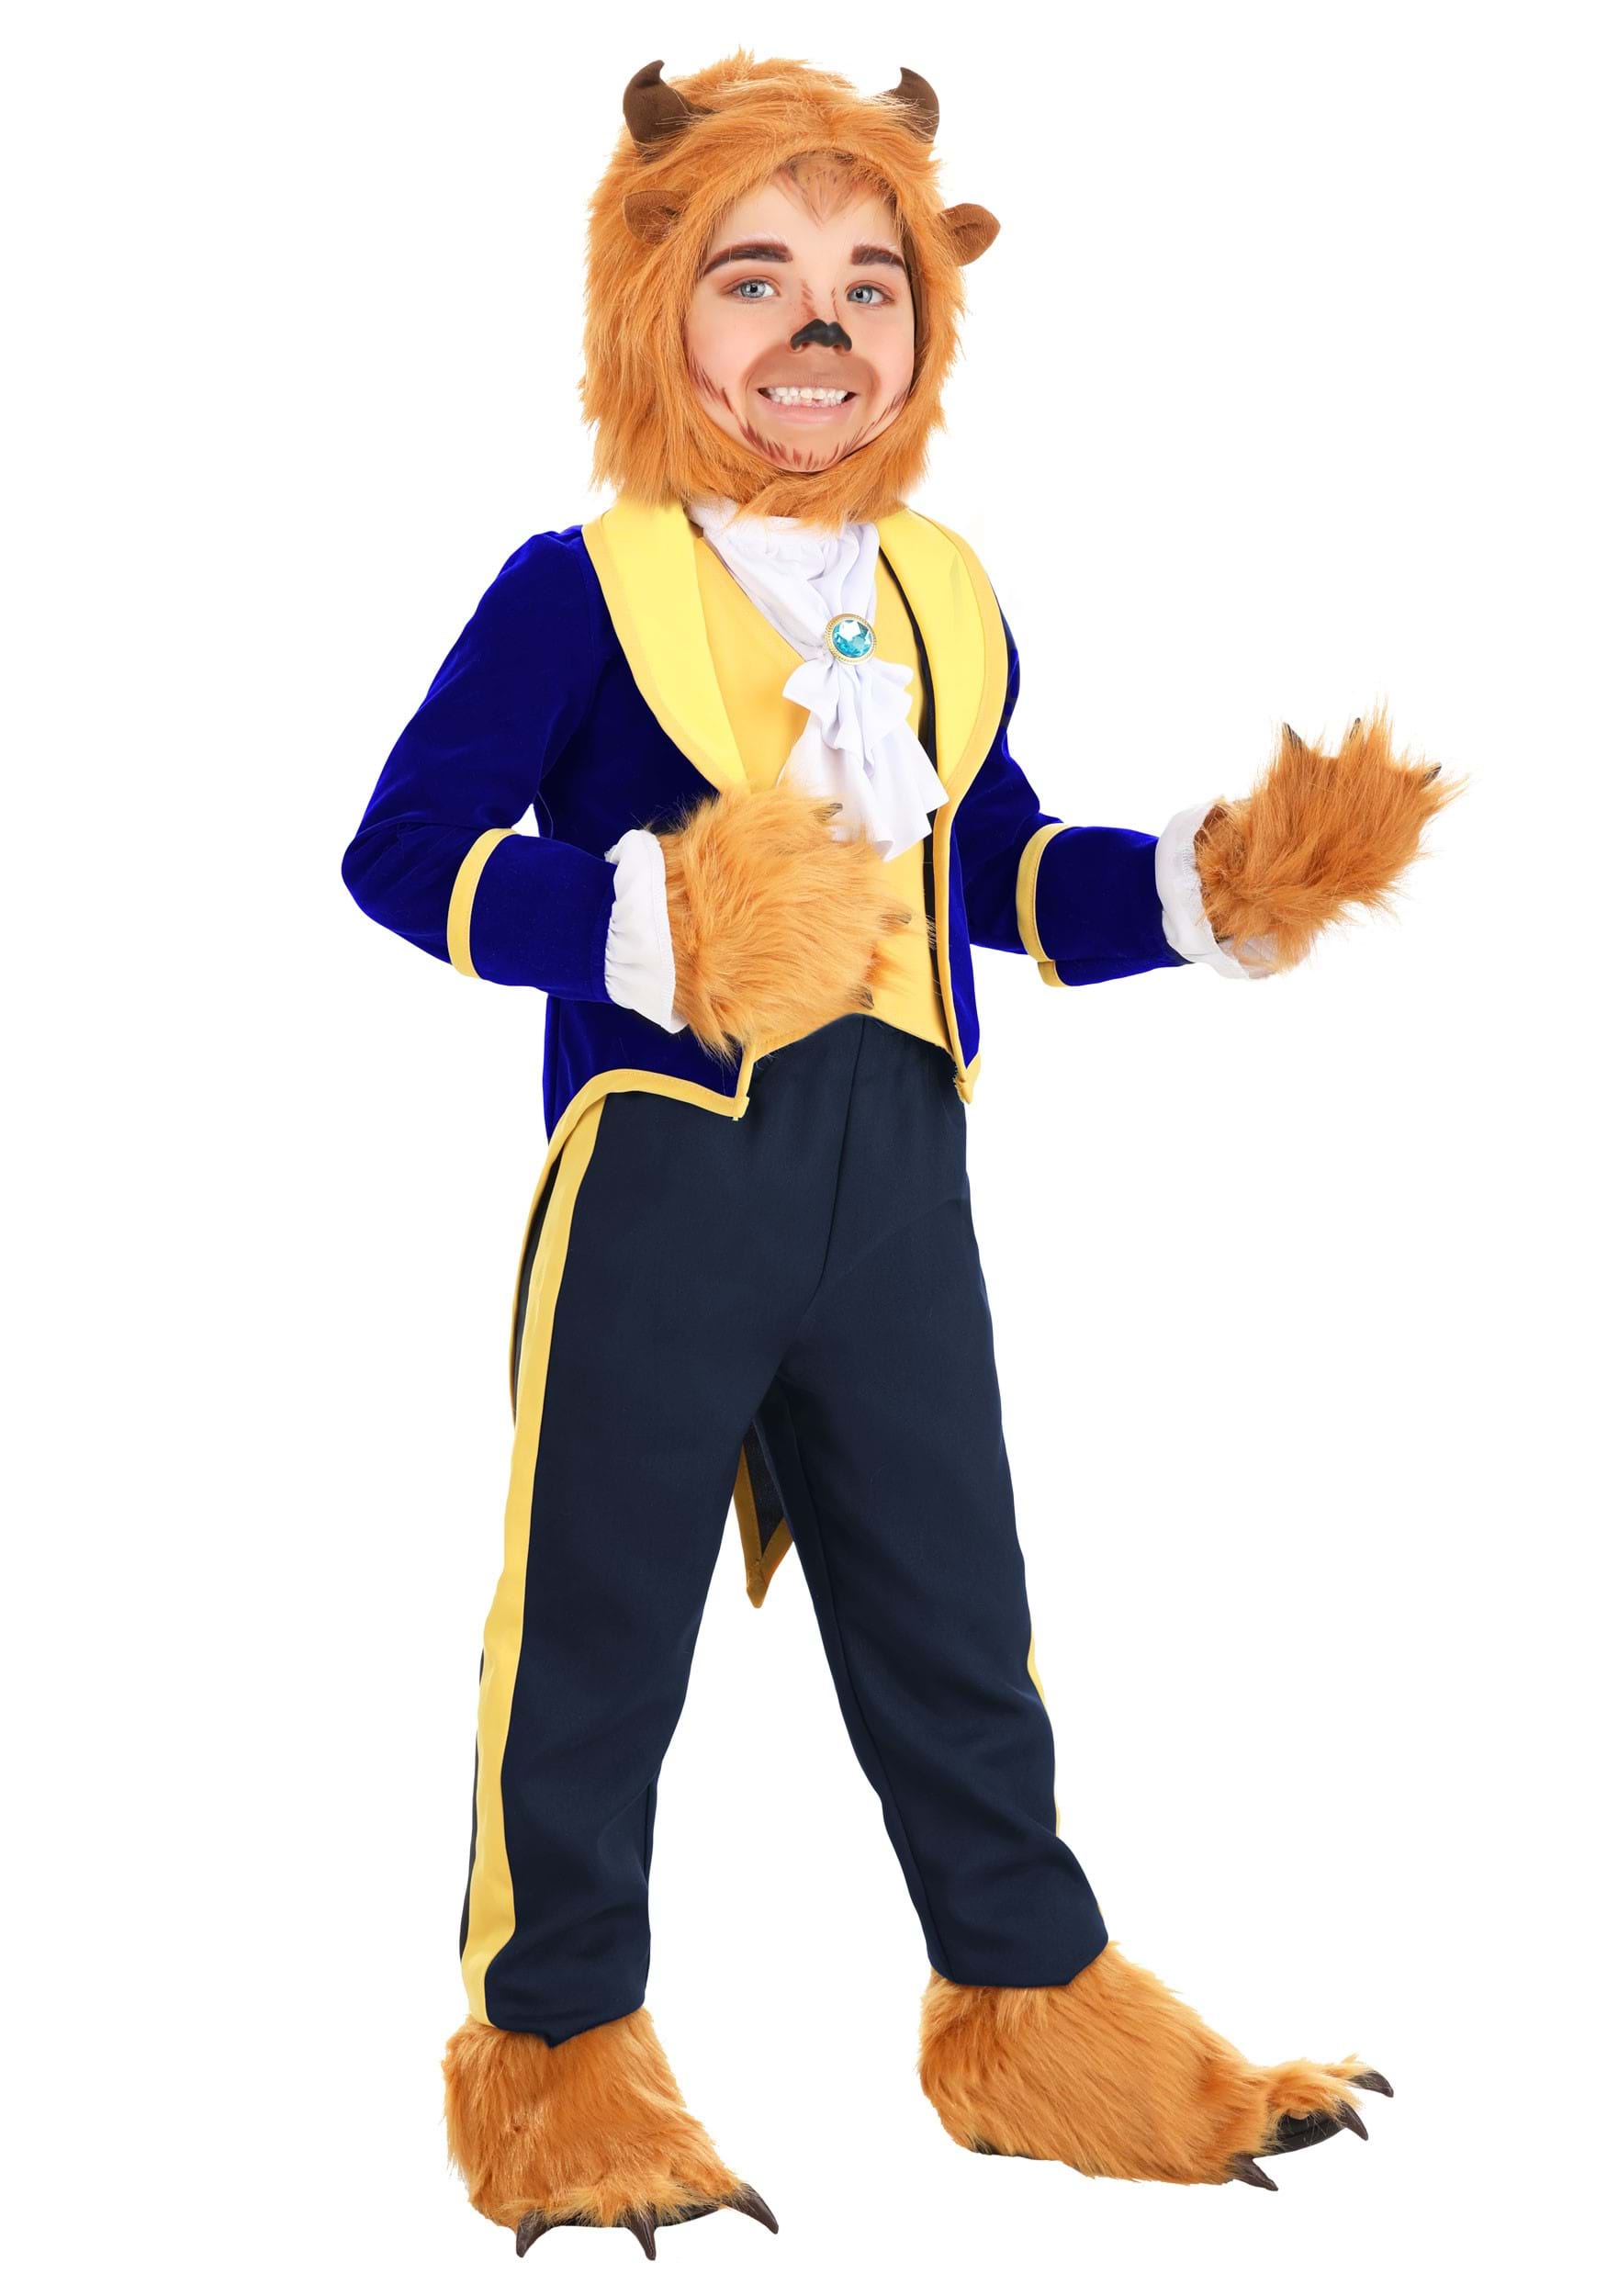 Photos - Fancy Dress A&D FUN Costumes Beauty and the Beast Beast Toddler Costume Yellow/Blue 